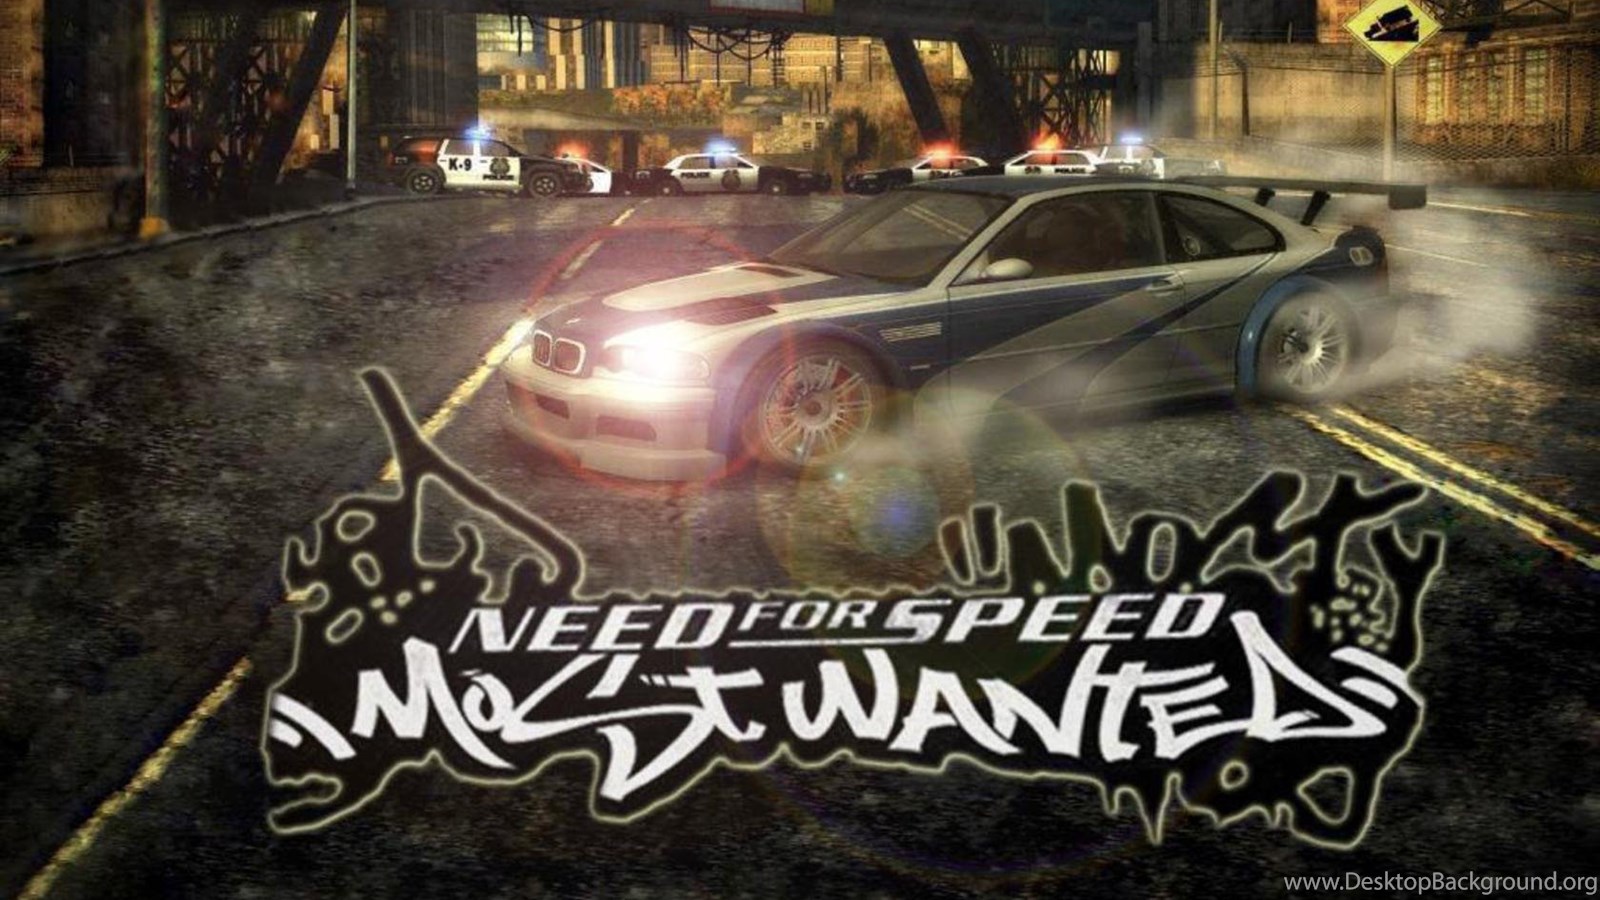 Песни из игры мост вантед. Новый NFS most wanted 2005. Most wanted 2005 геймплей. Need for Speed most wanted стрим. NFS MW 2005 Remake.